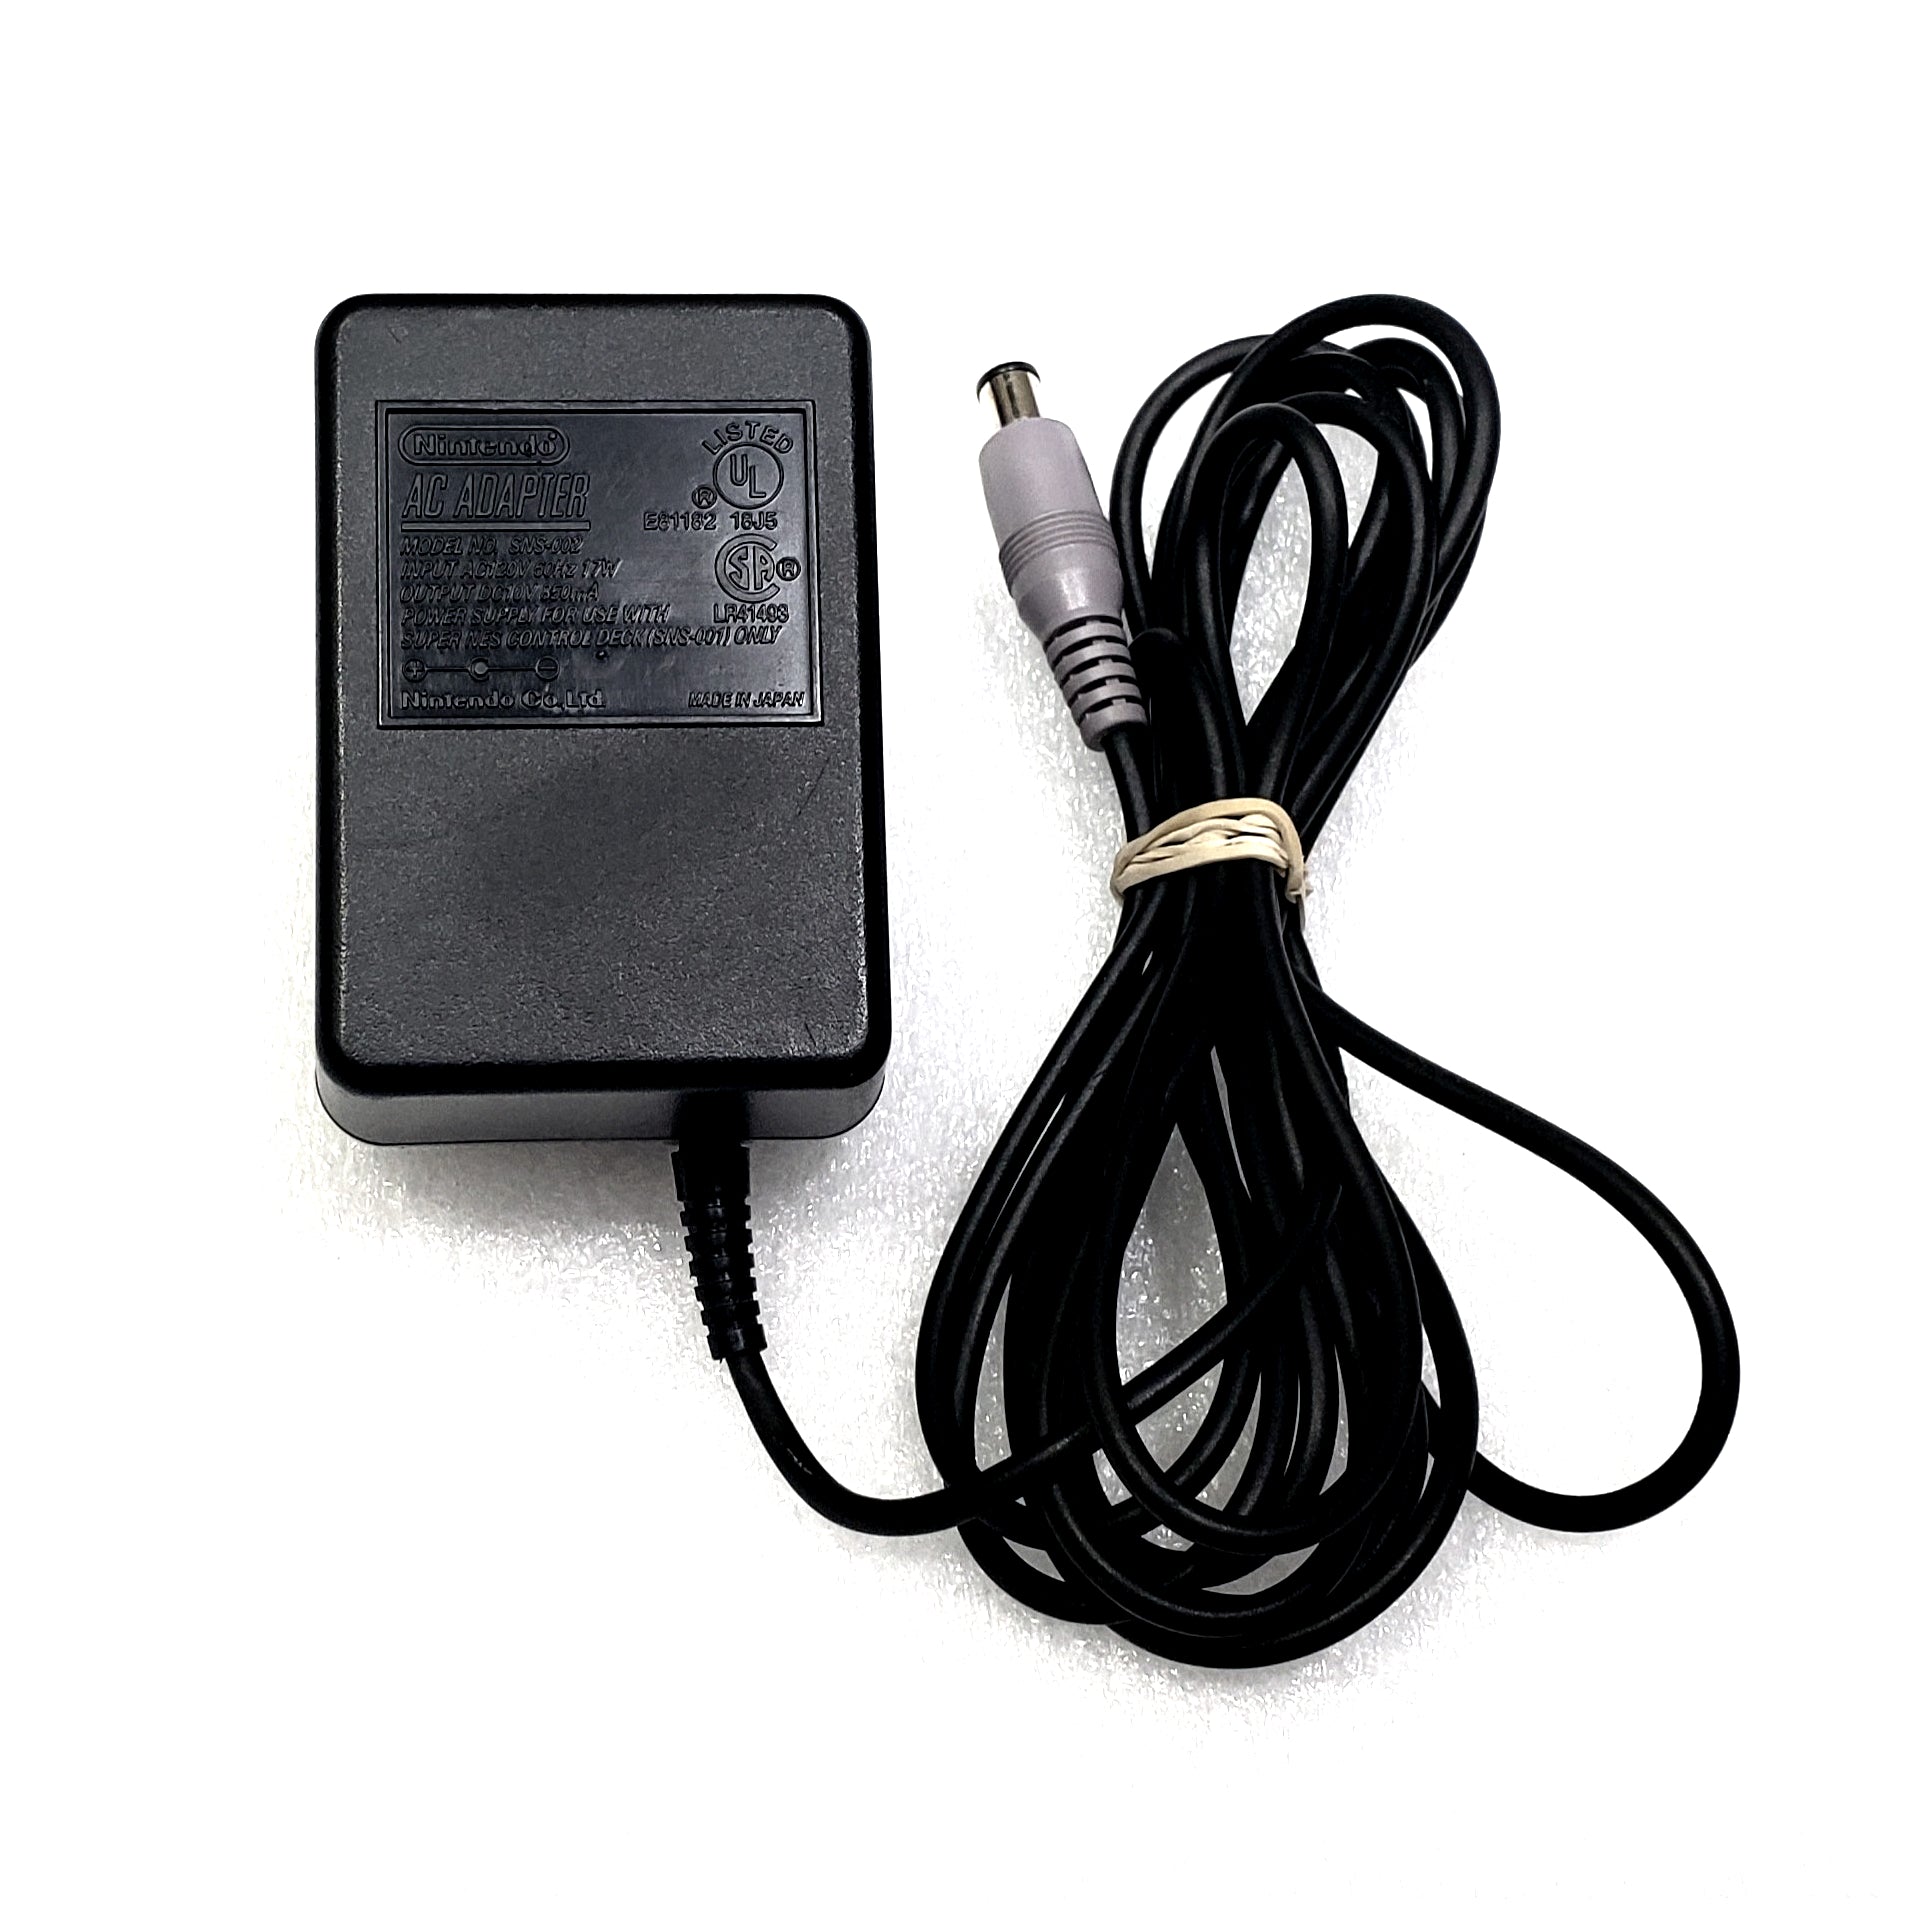 Super Nintendo (SNES) Official AC Power Adapter - YourGamingShop.com - Buy, Sell, Trade Video Games Online. 120 Day Warranty. Satisfaction Guaranteed.